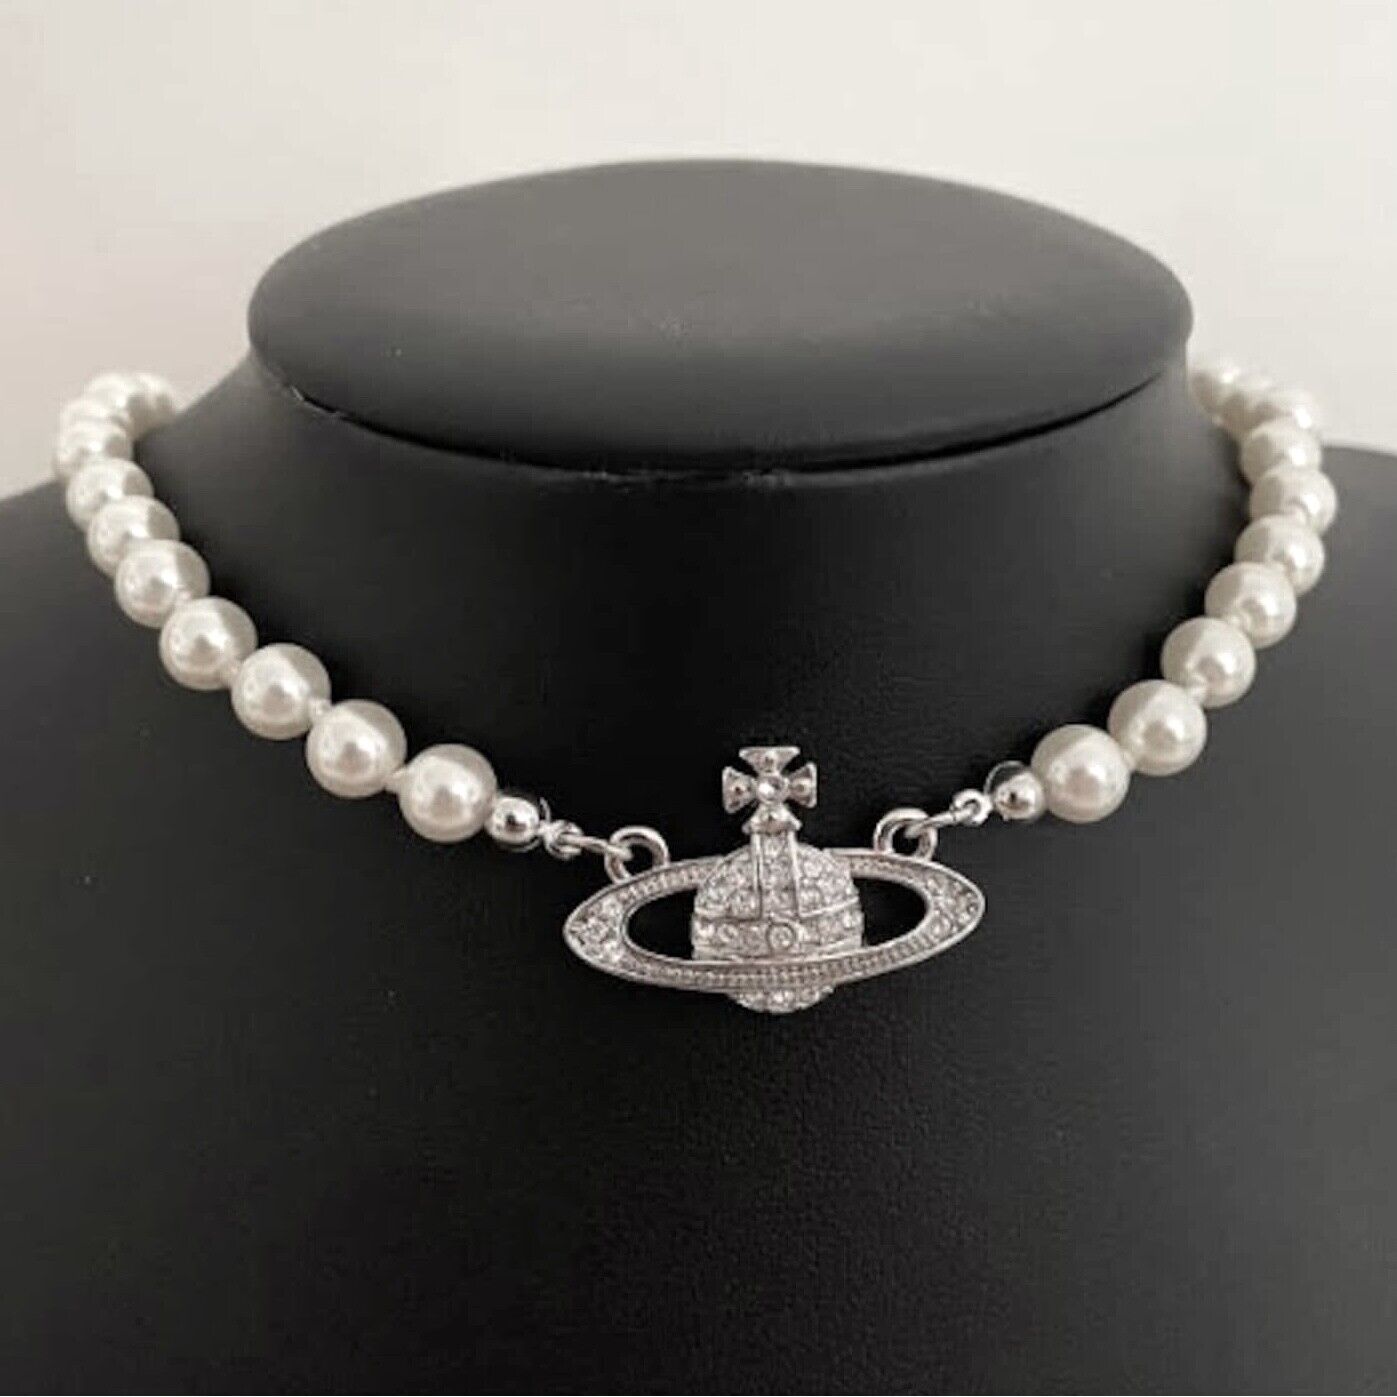 Authentic Vivienne Westwood Silver White Pearl Necklace Choker Chain